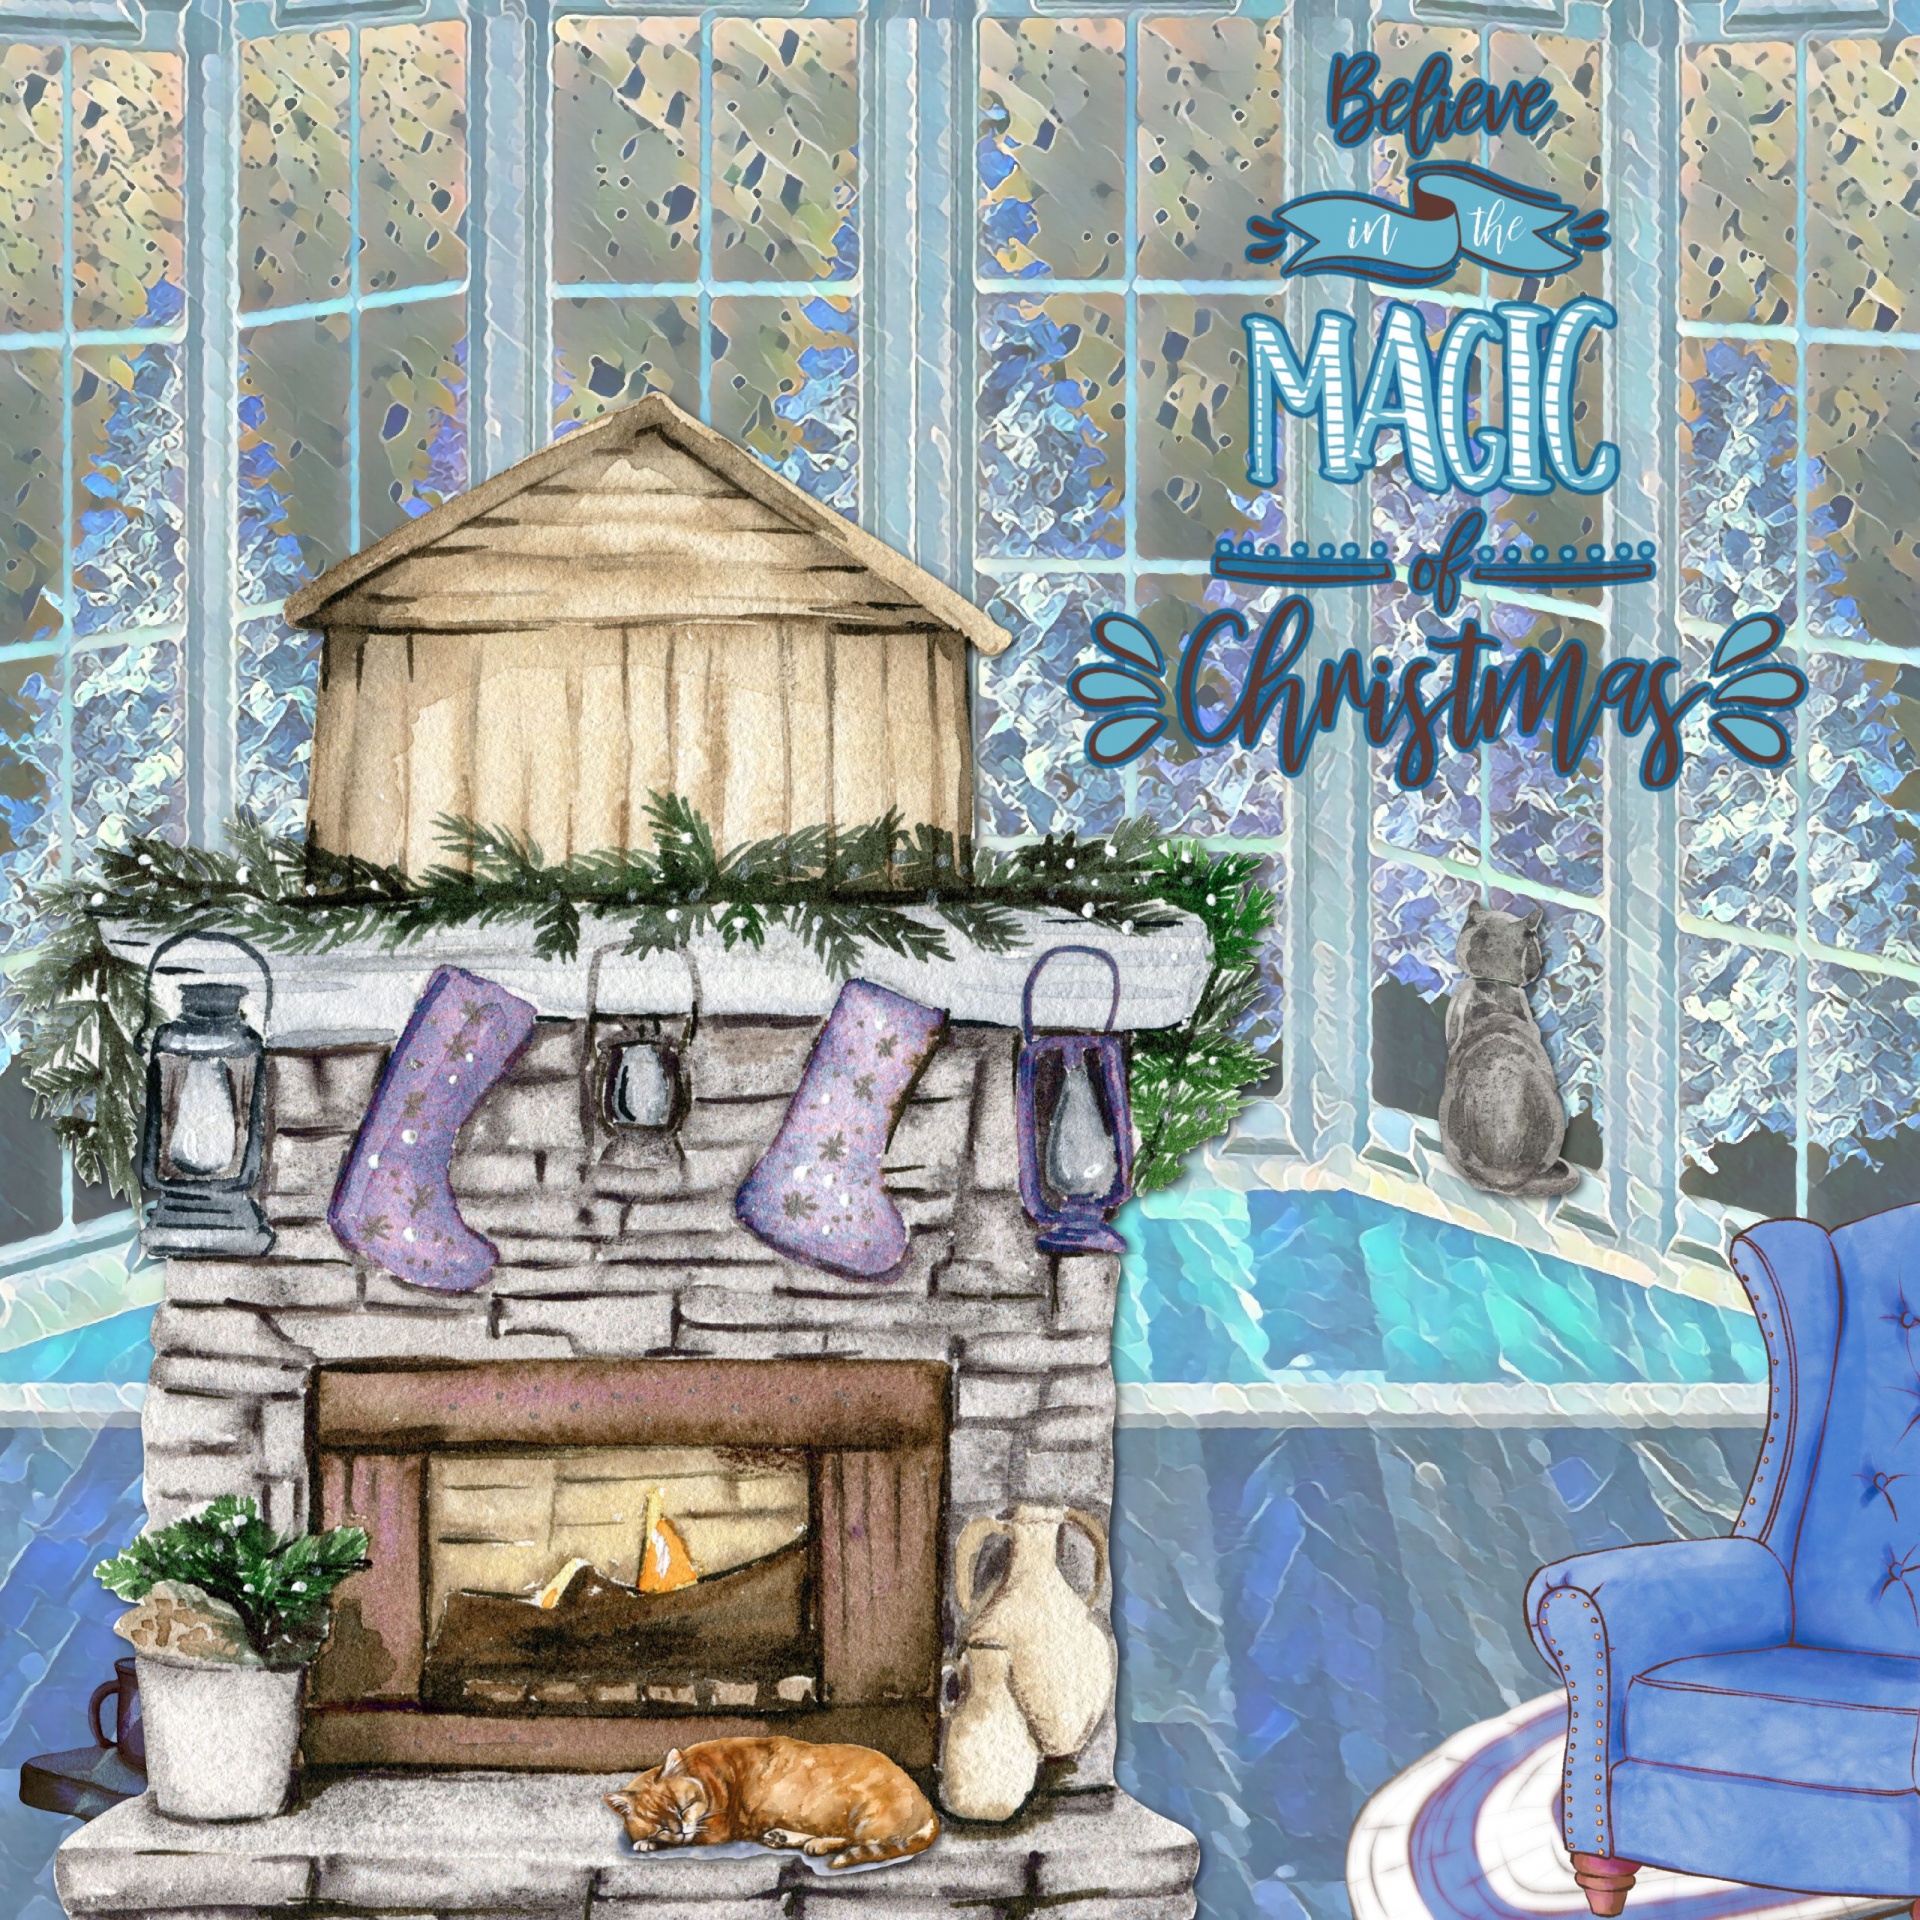 watercolor digital art illustration featuring a fireplace with words believe in the magic of christmas. Cats in the image